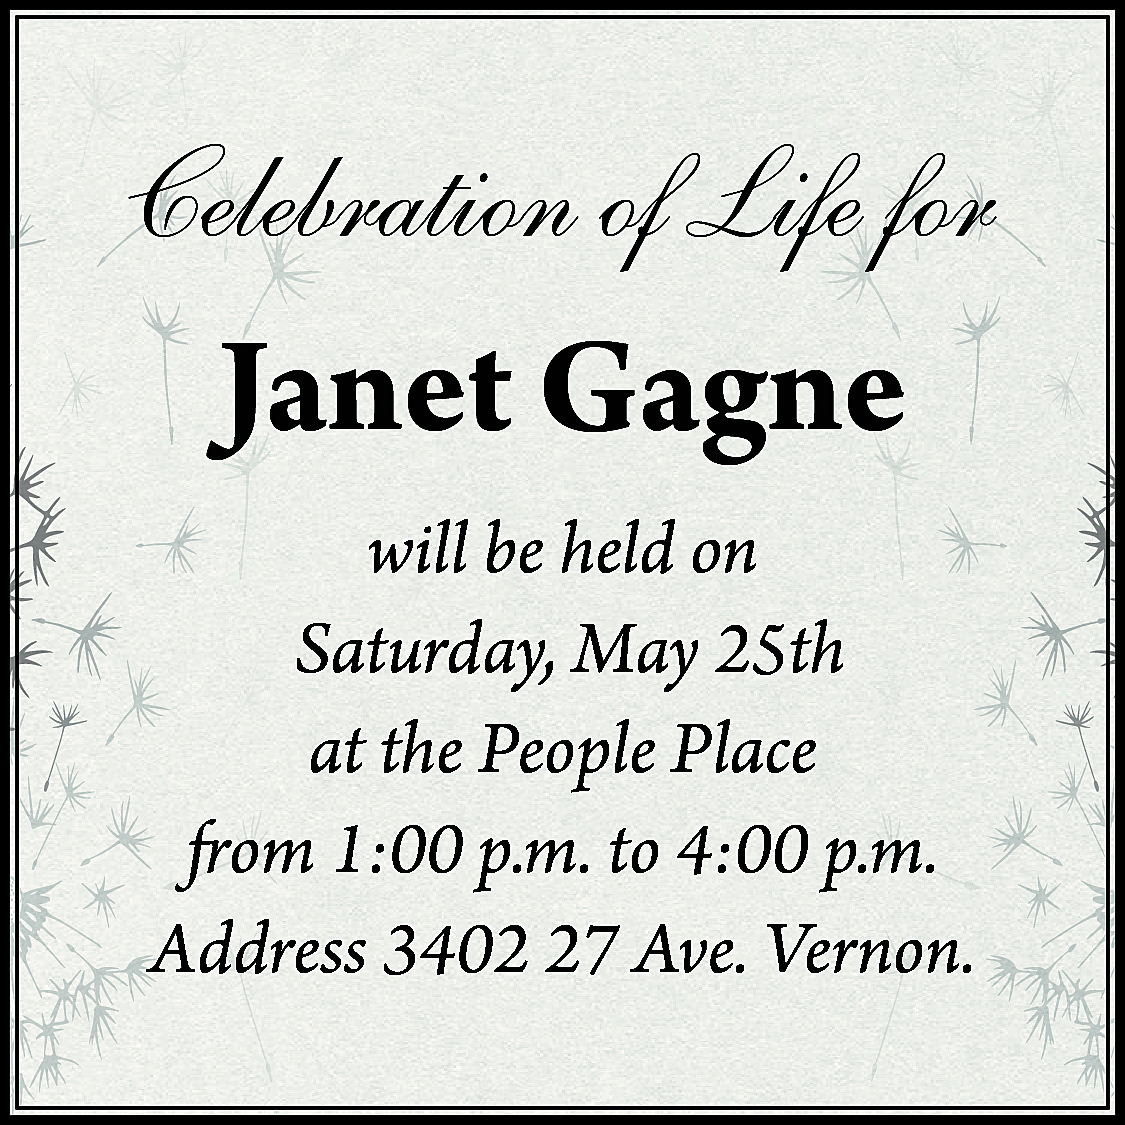 Celebration of Life for <br>  Celebration of Life for    Janet Gagne  will be held on  Saturday, May 25th  at the People Place  from 1:00 p.m. to 4:00 p.m.  Address 3402 27 Ave. Vernon.    